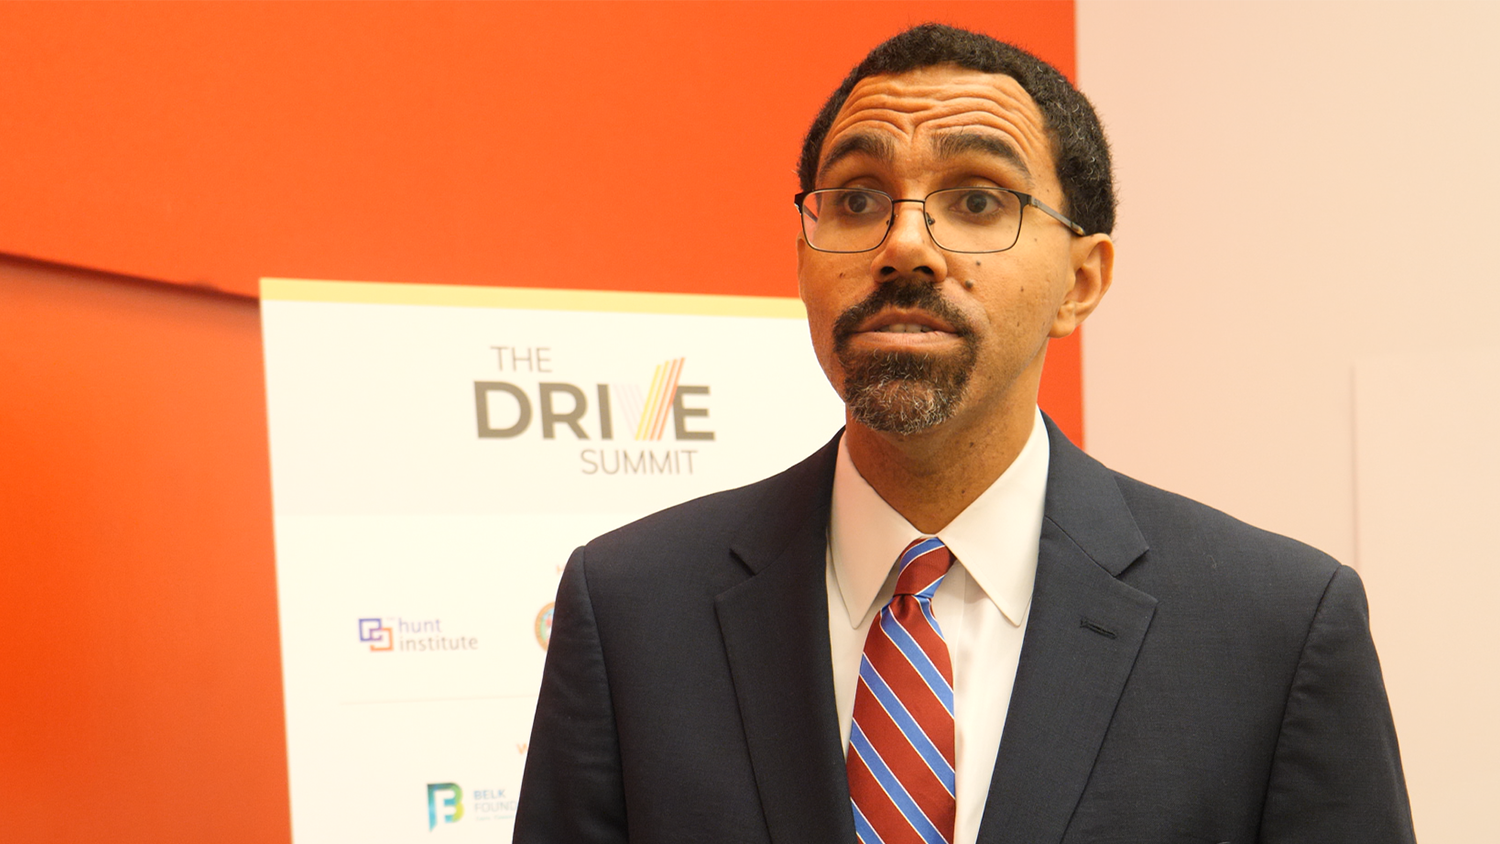 Former U.S. Secretary of Education John B. King Jr. spoke with the NC State College of Education during the DRIVE Summit